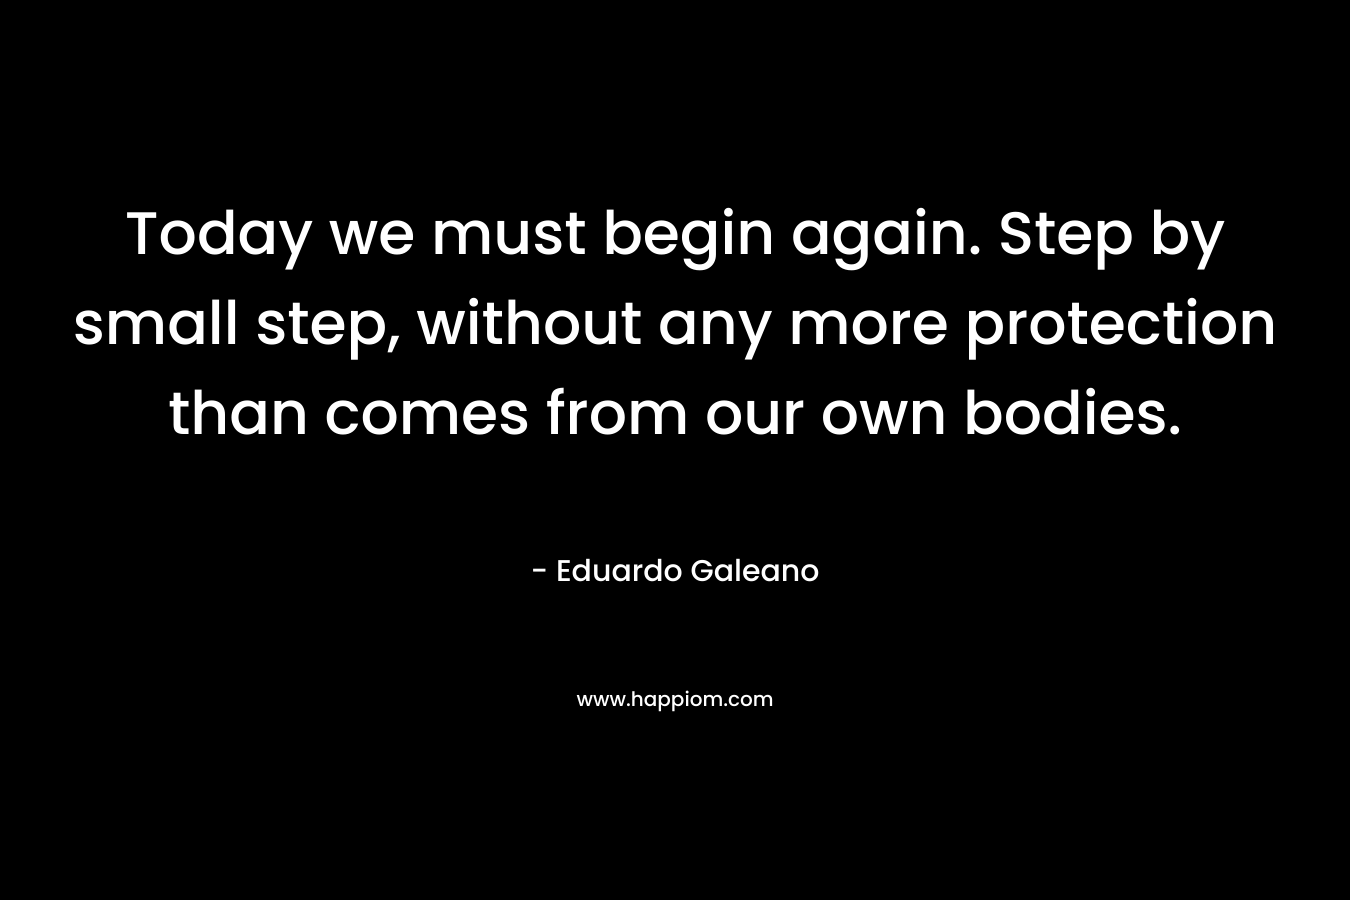 Today we must begin again. Step by small step, without any more protection than comes from our own bodies. – Eduardo Galeano